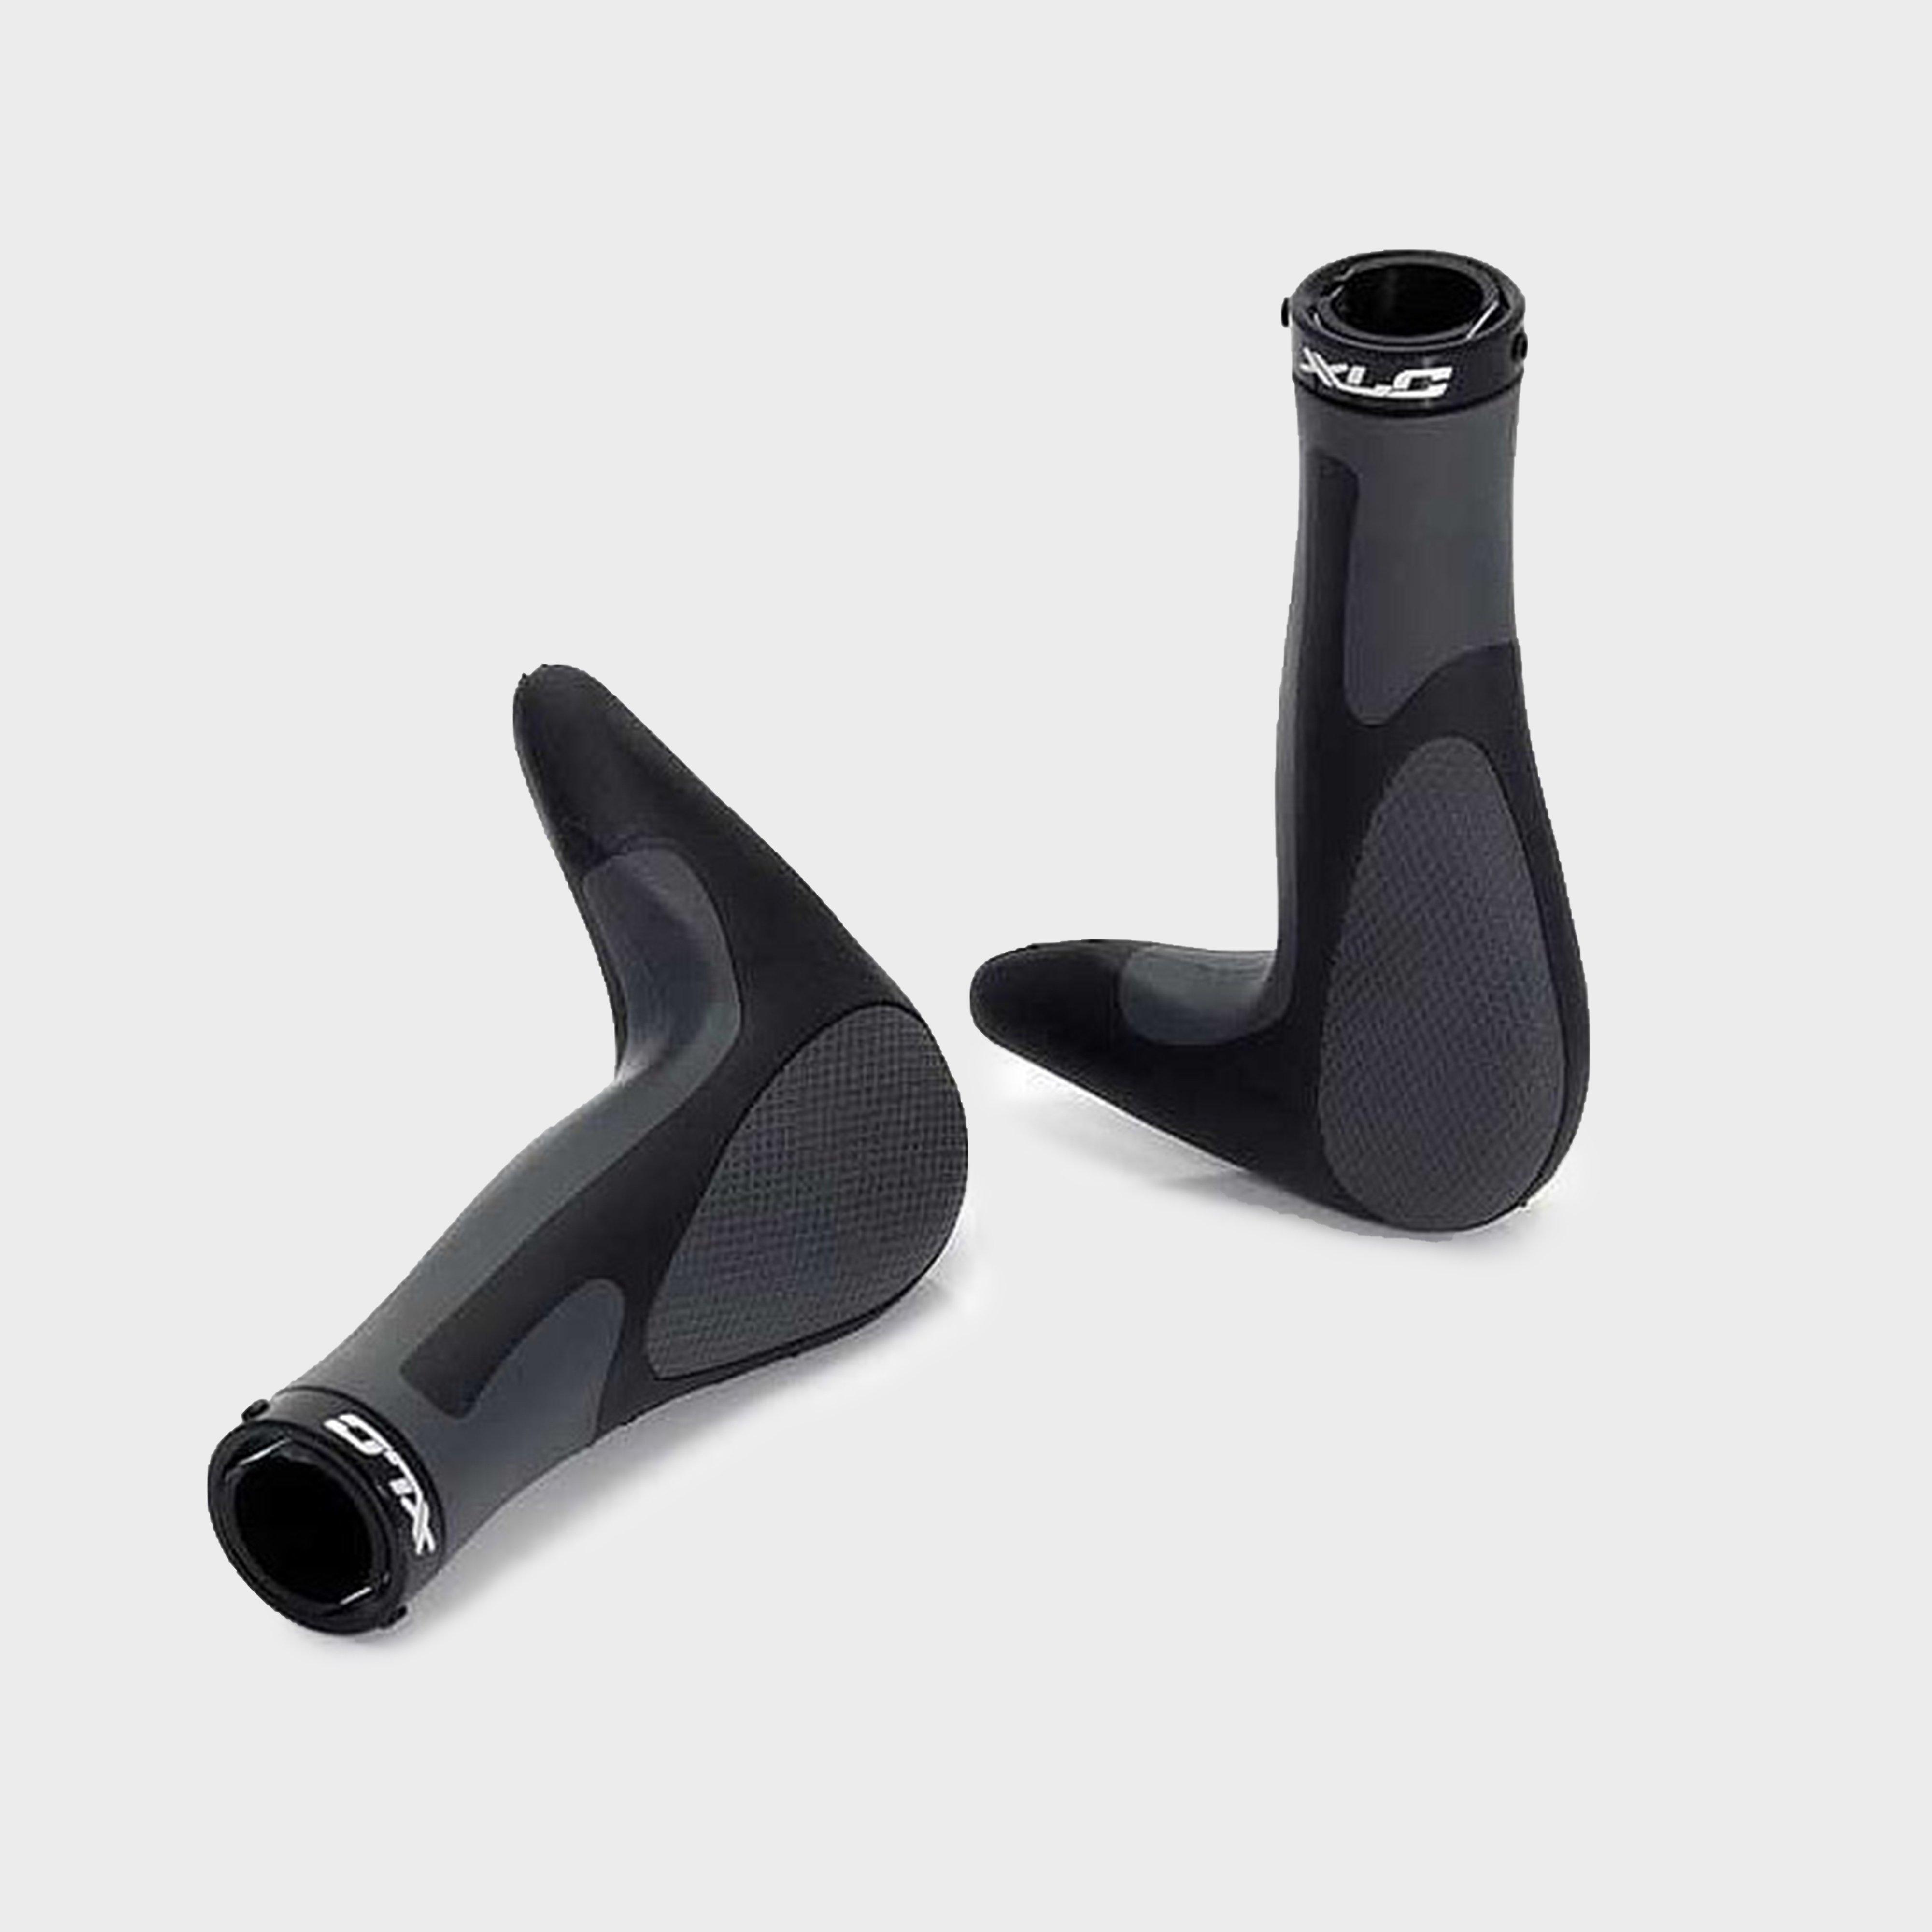 Xlc Components Comfort Locking Grips And Bar Ends  Black